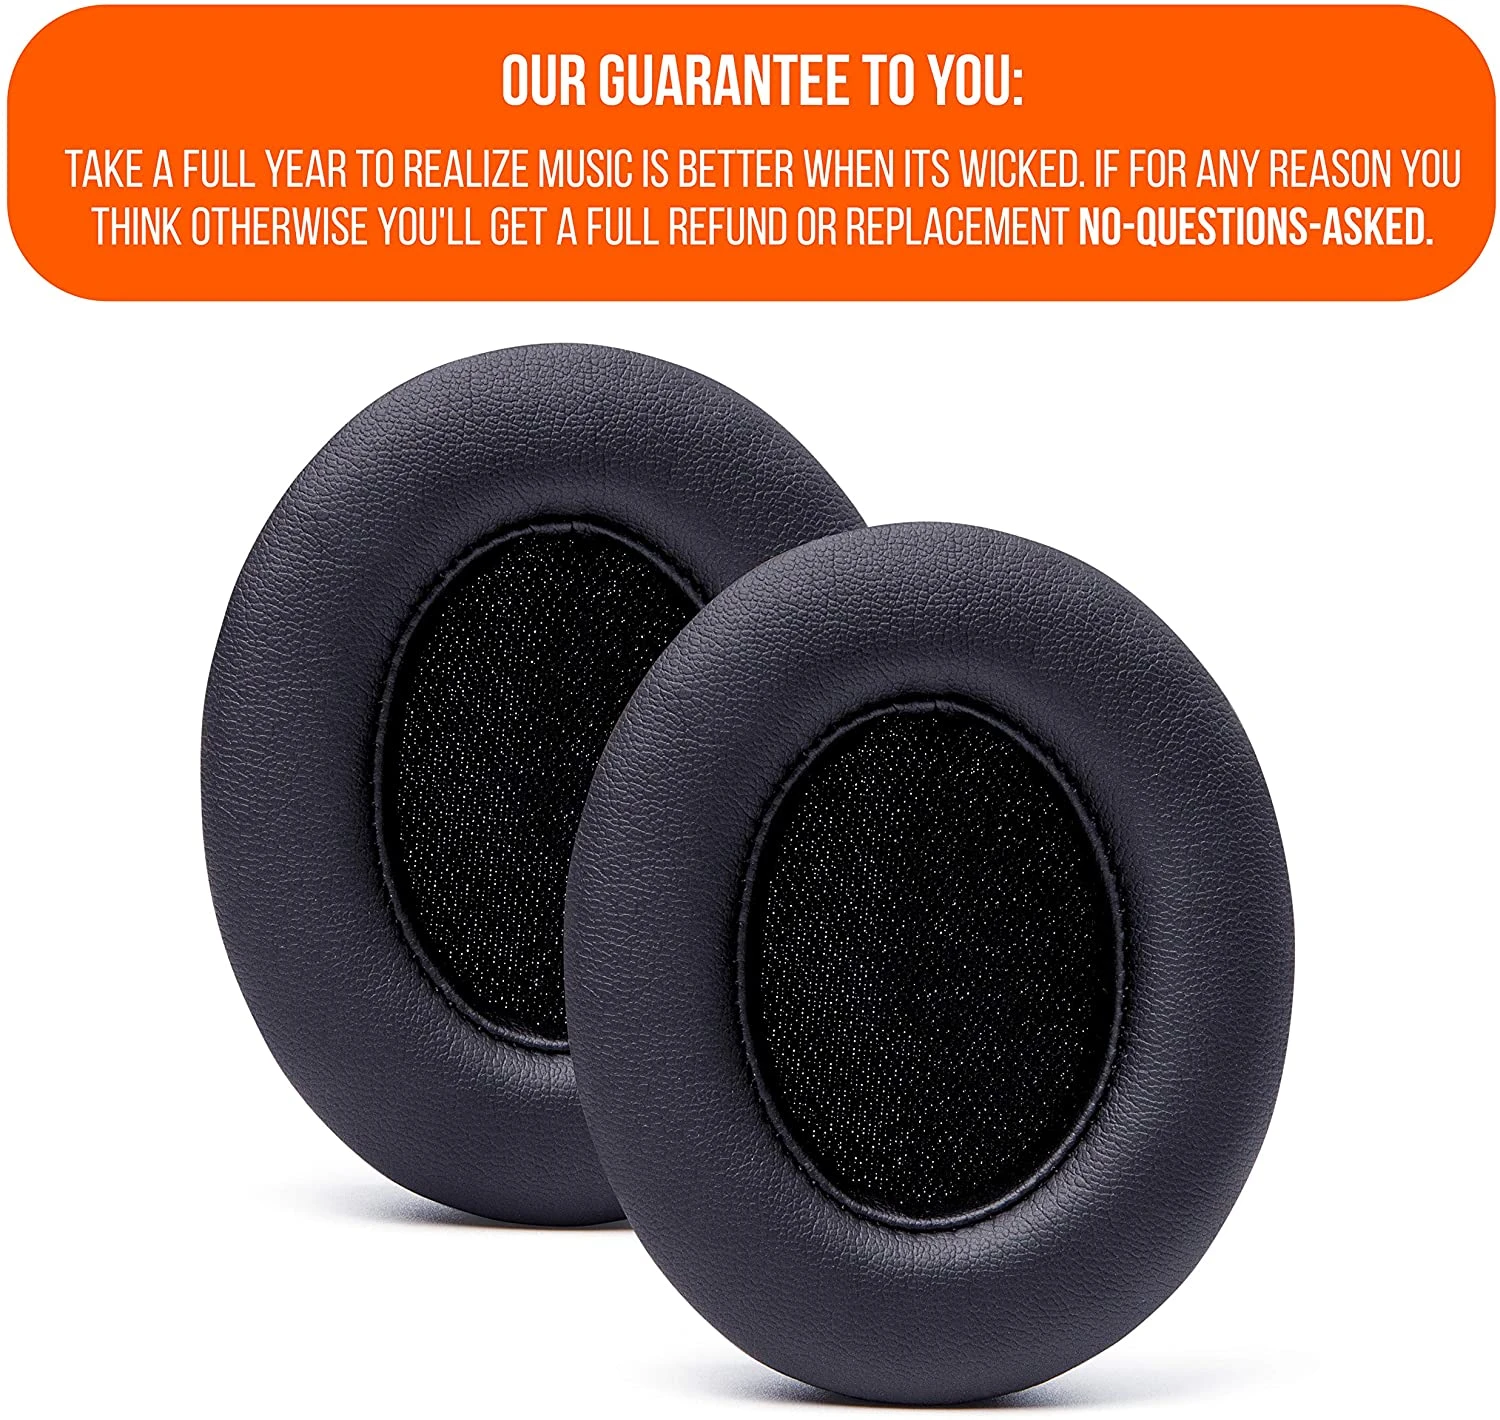 Upgraded Beats Ear Pads - Compatible with Studio Wired B0500 / Wireless B0501 / Studio 2 and Studio 3 Over Ear Headphones ONLY